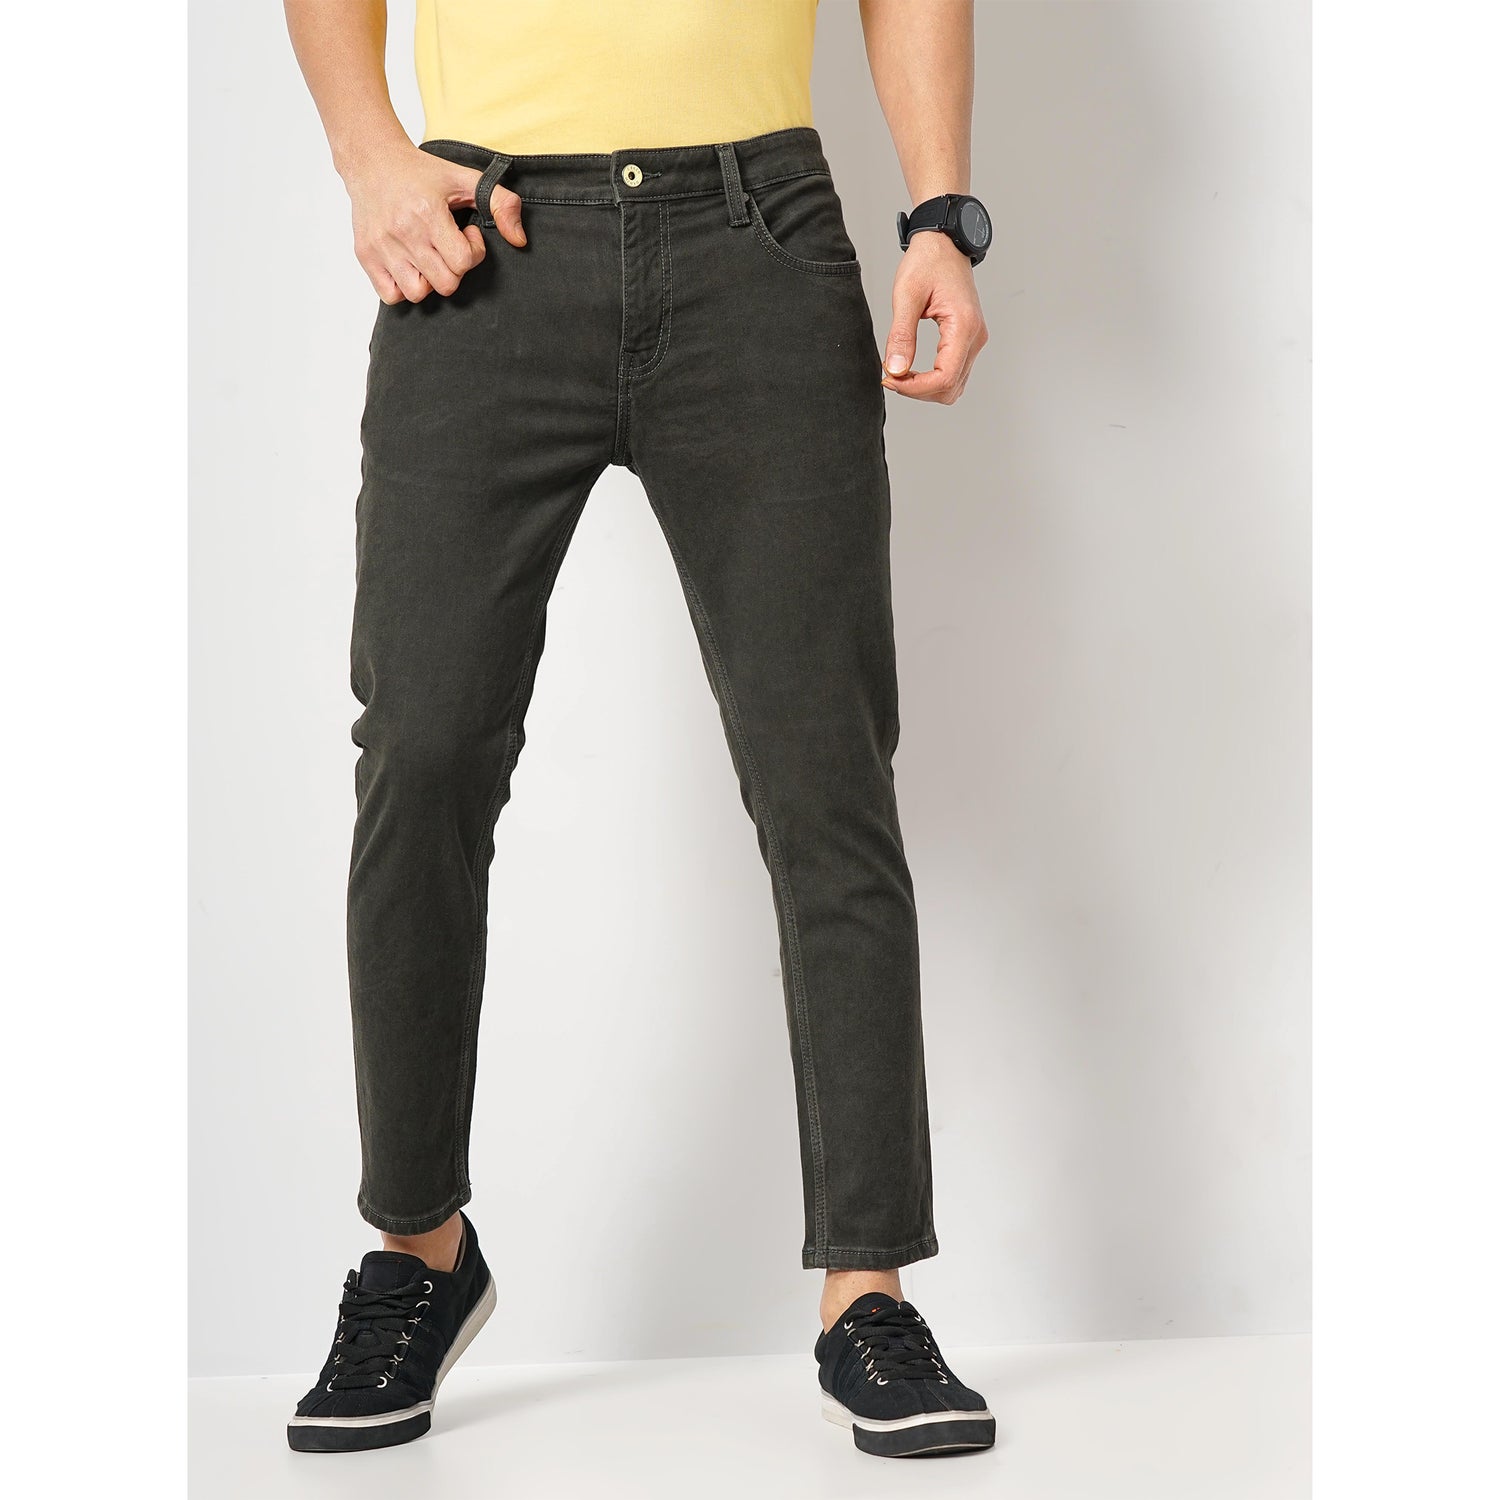 Men's Olive Solid Skinny Fit Cotton Ankle Length Jeans (FOANKLE9)